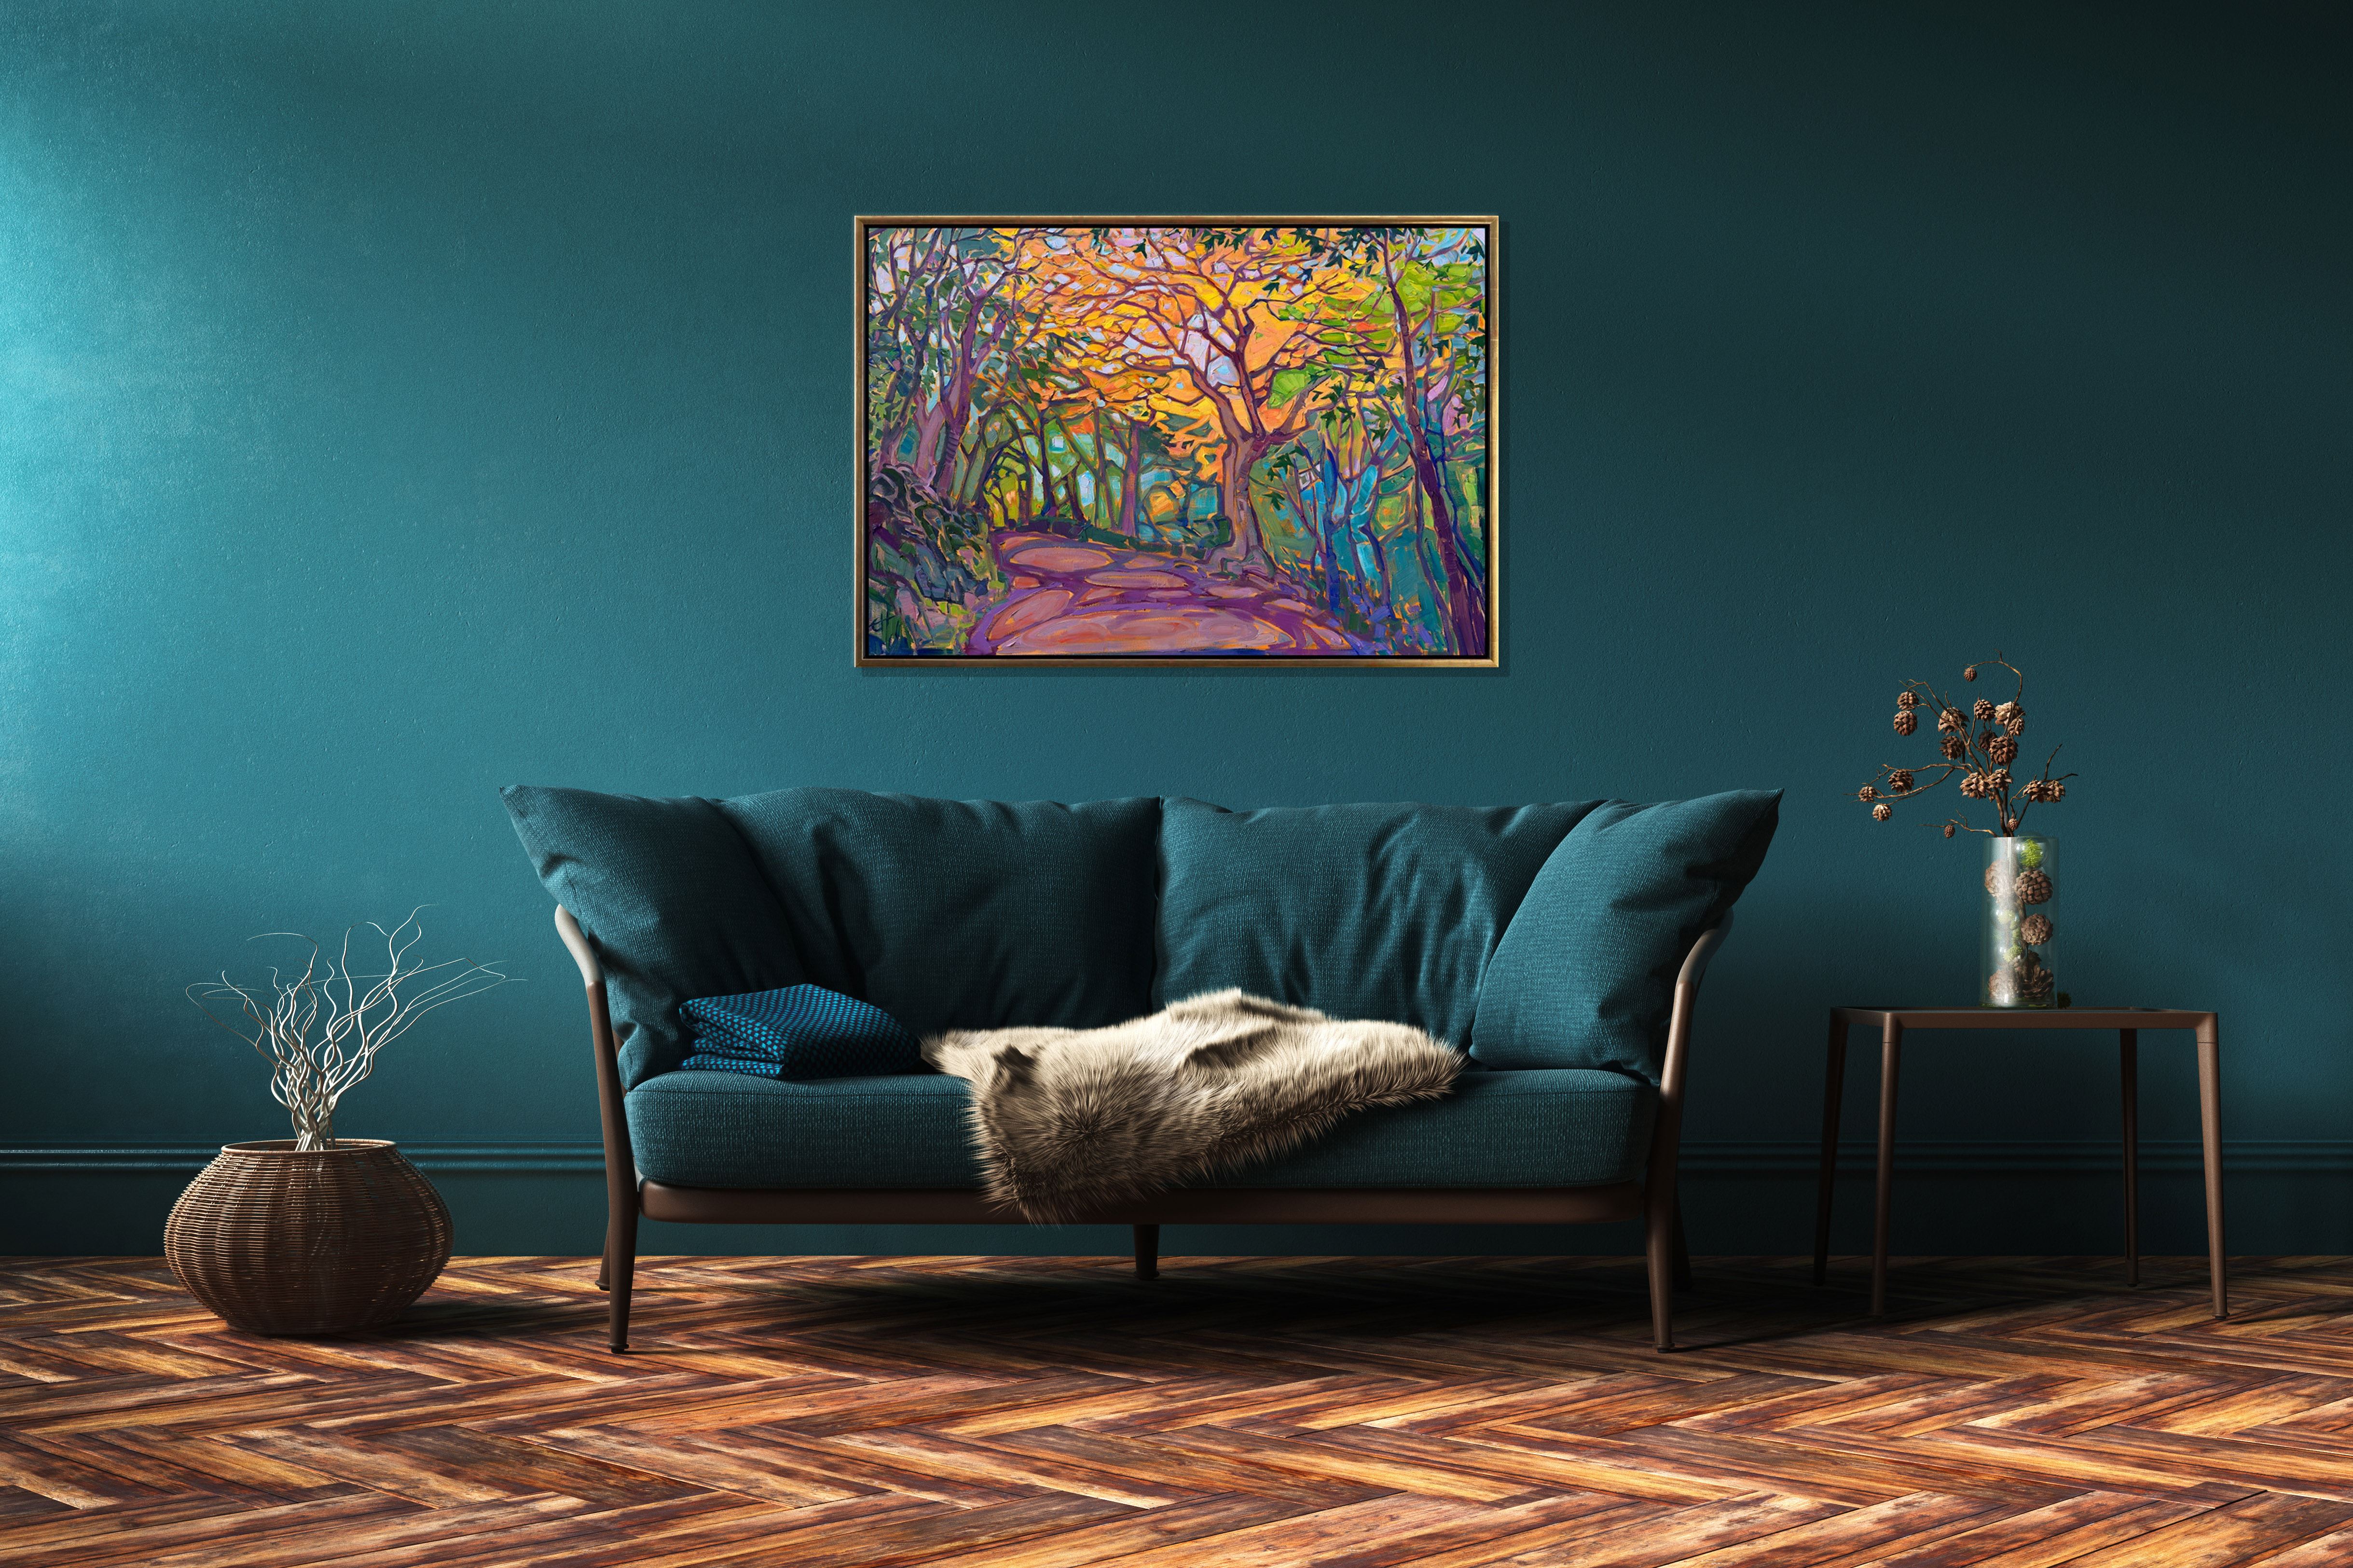 An Erin Hanson painting above a couch